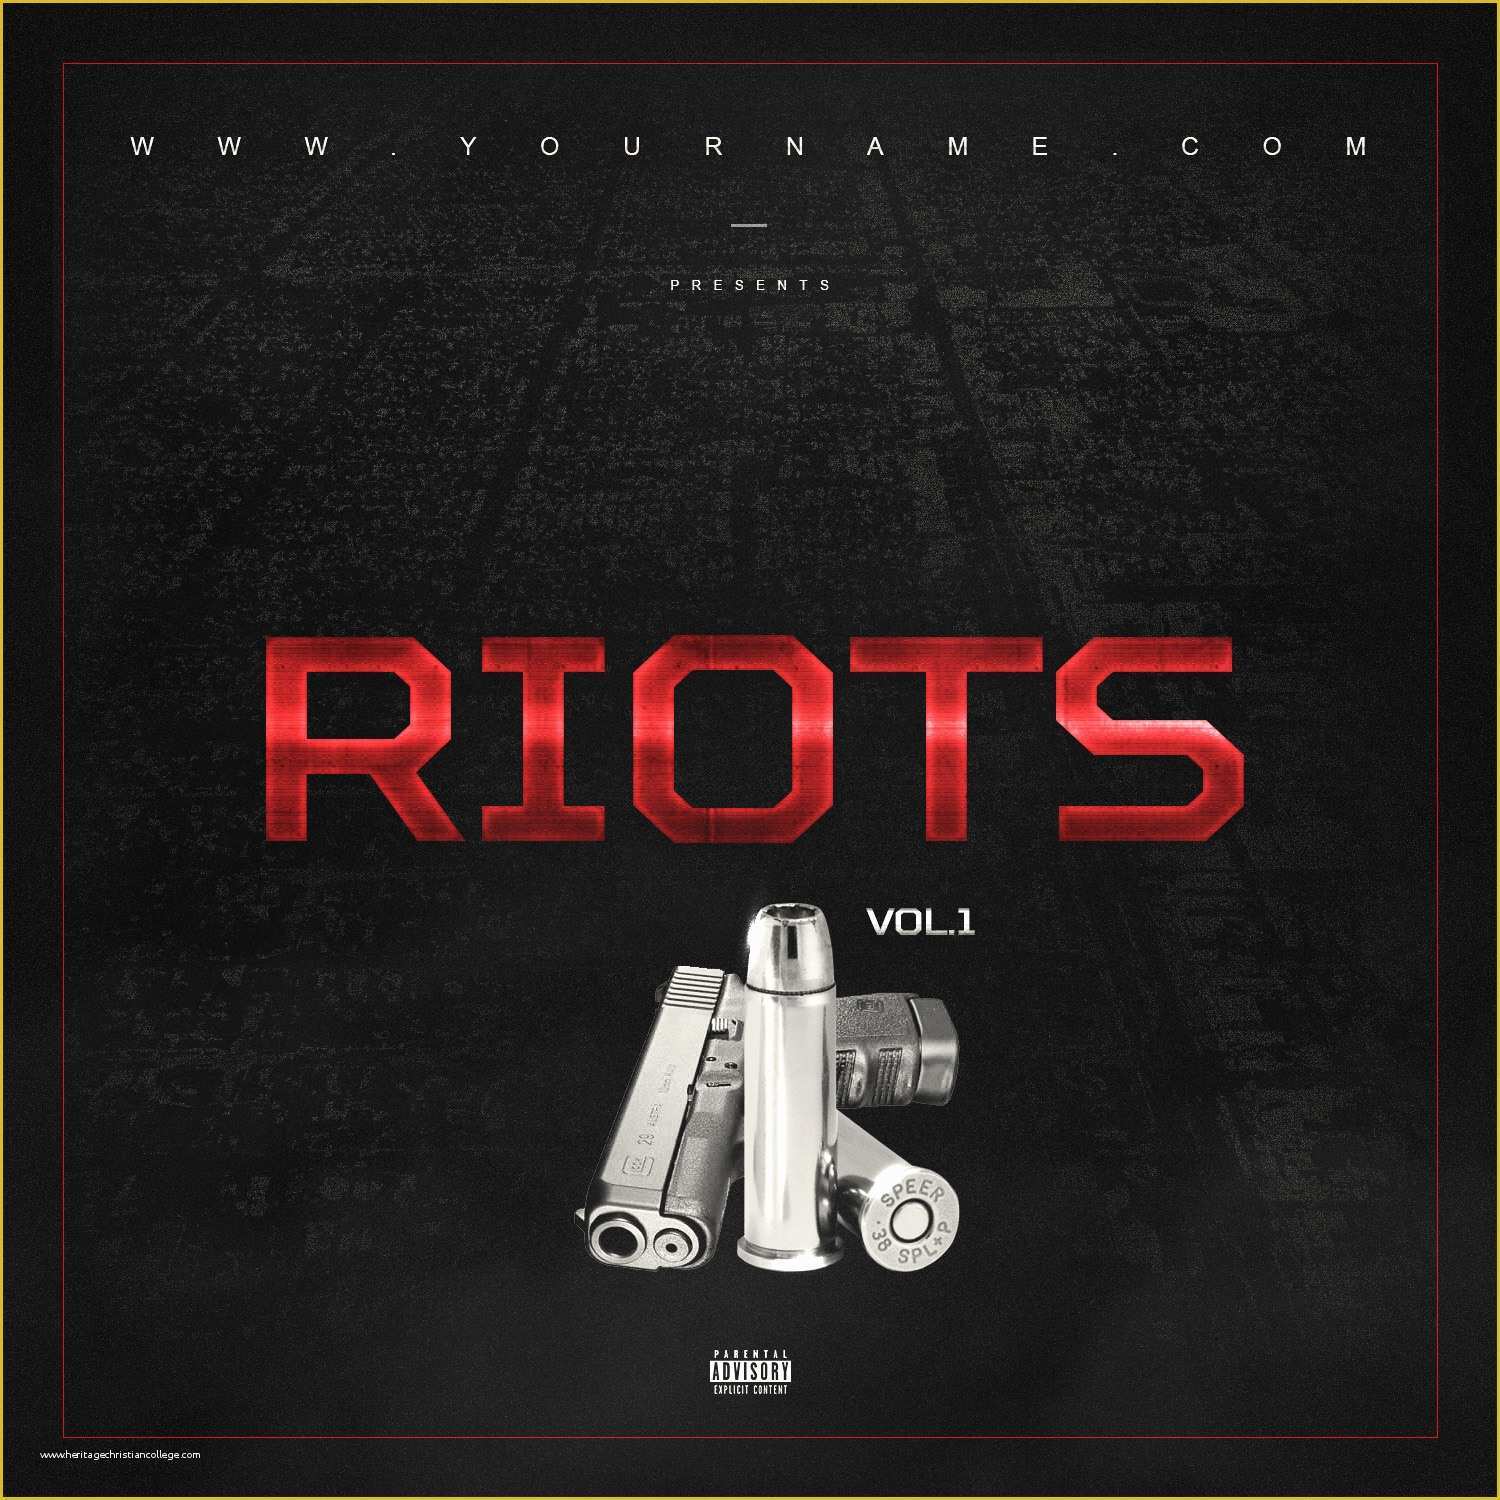 Free Mixtape Covers Templates Of Riots Mixtape Cover Template Vms